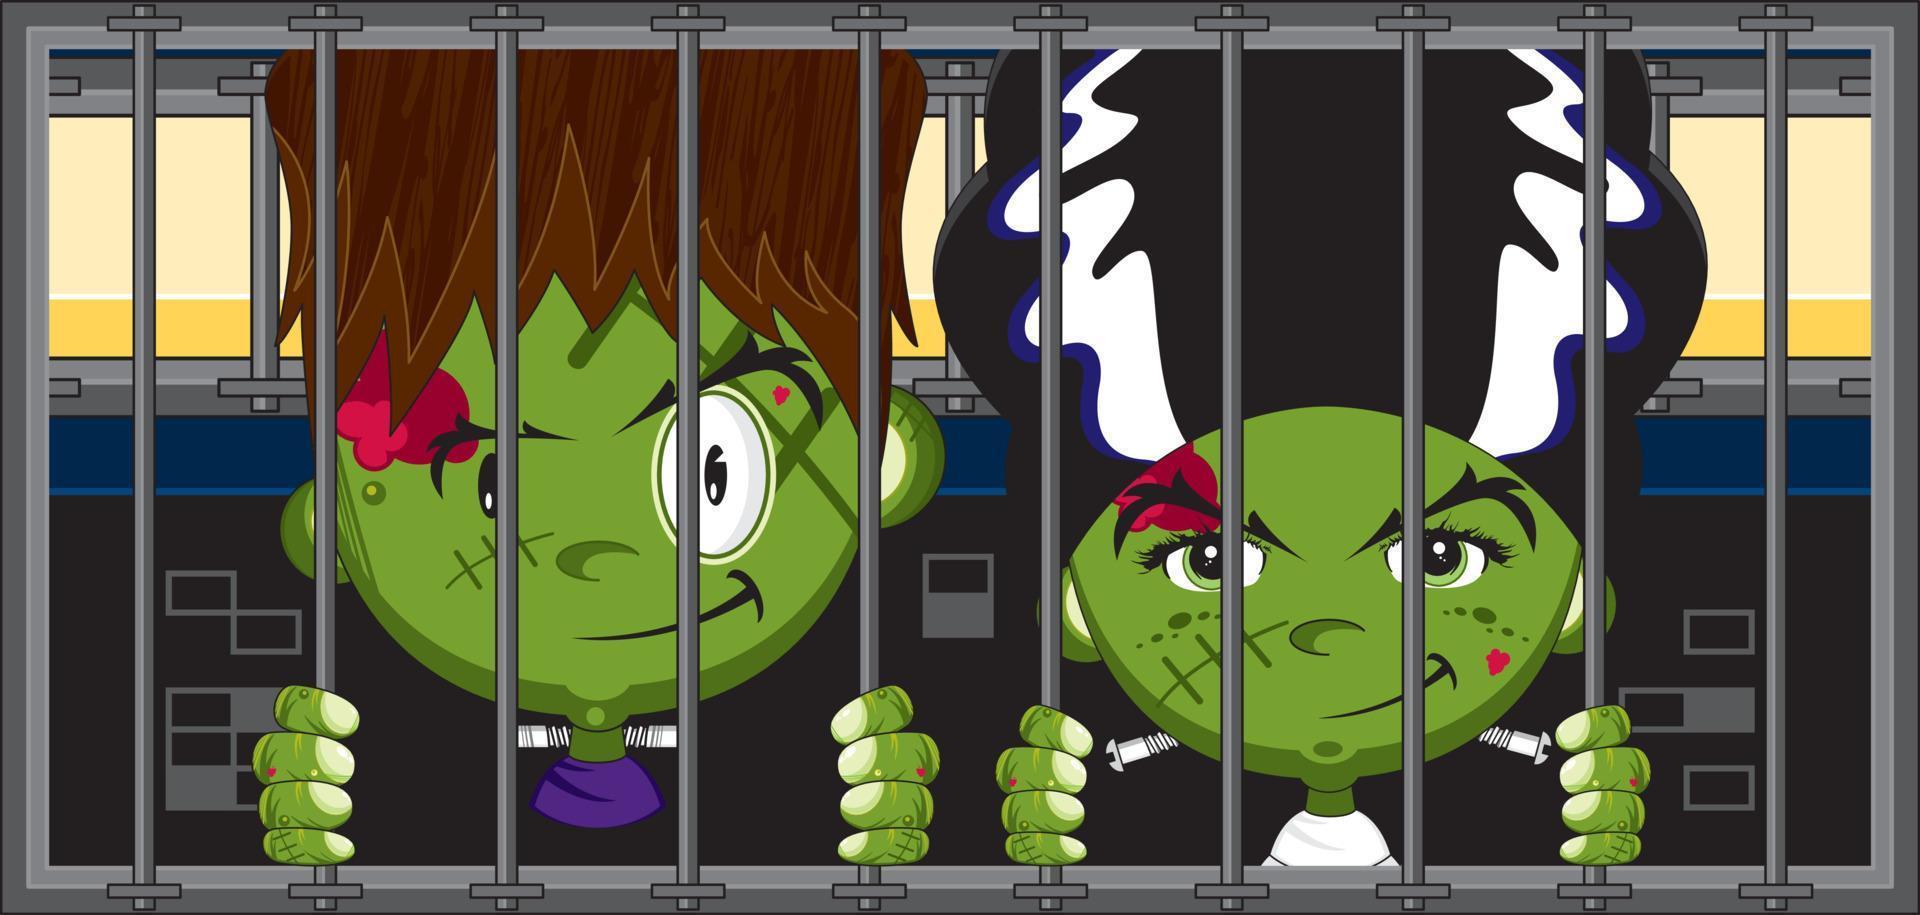 Cartoon Scary Frankensteins Monsters in Jail Cell - Spooky Halloween Illustration vector